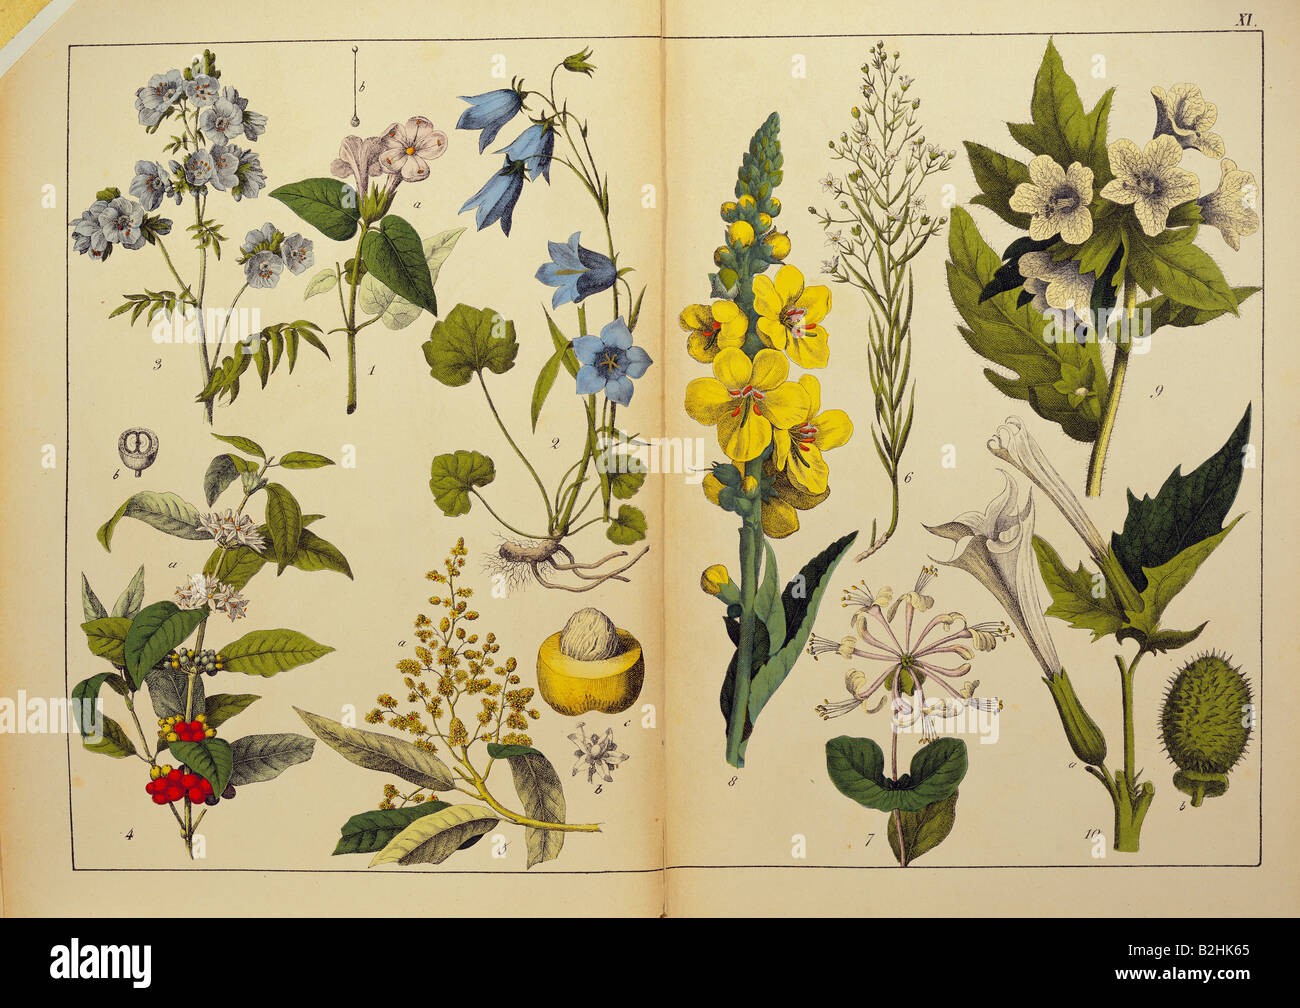 botany, flowers, trees, herbs, plants, 1st order, 5th grade, from 'Naturgeschichte des Pflanzenreichs in Bildern' (Natural history of the kingdom of plants in pictures), Stuttgart, Esslingen, Germany, 1853, private collection, Stock Photo